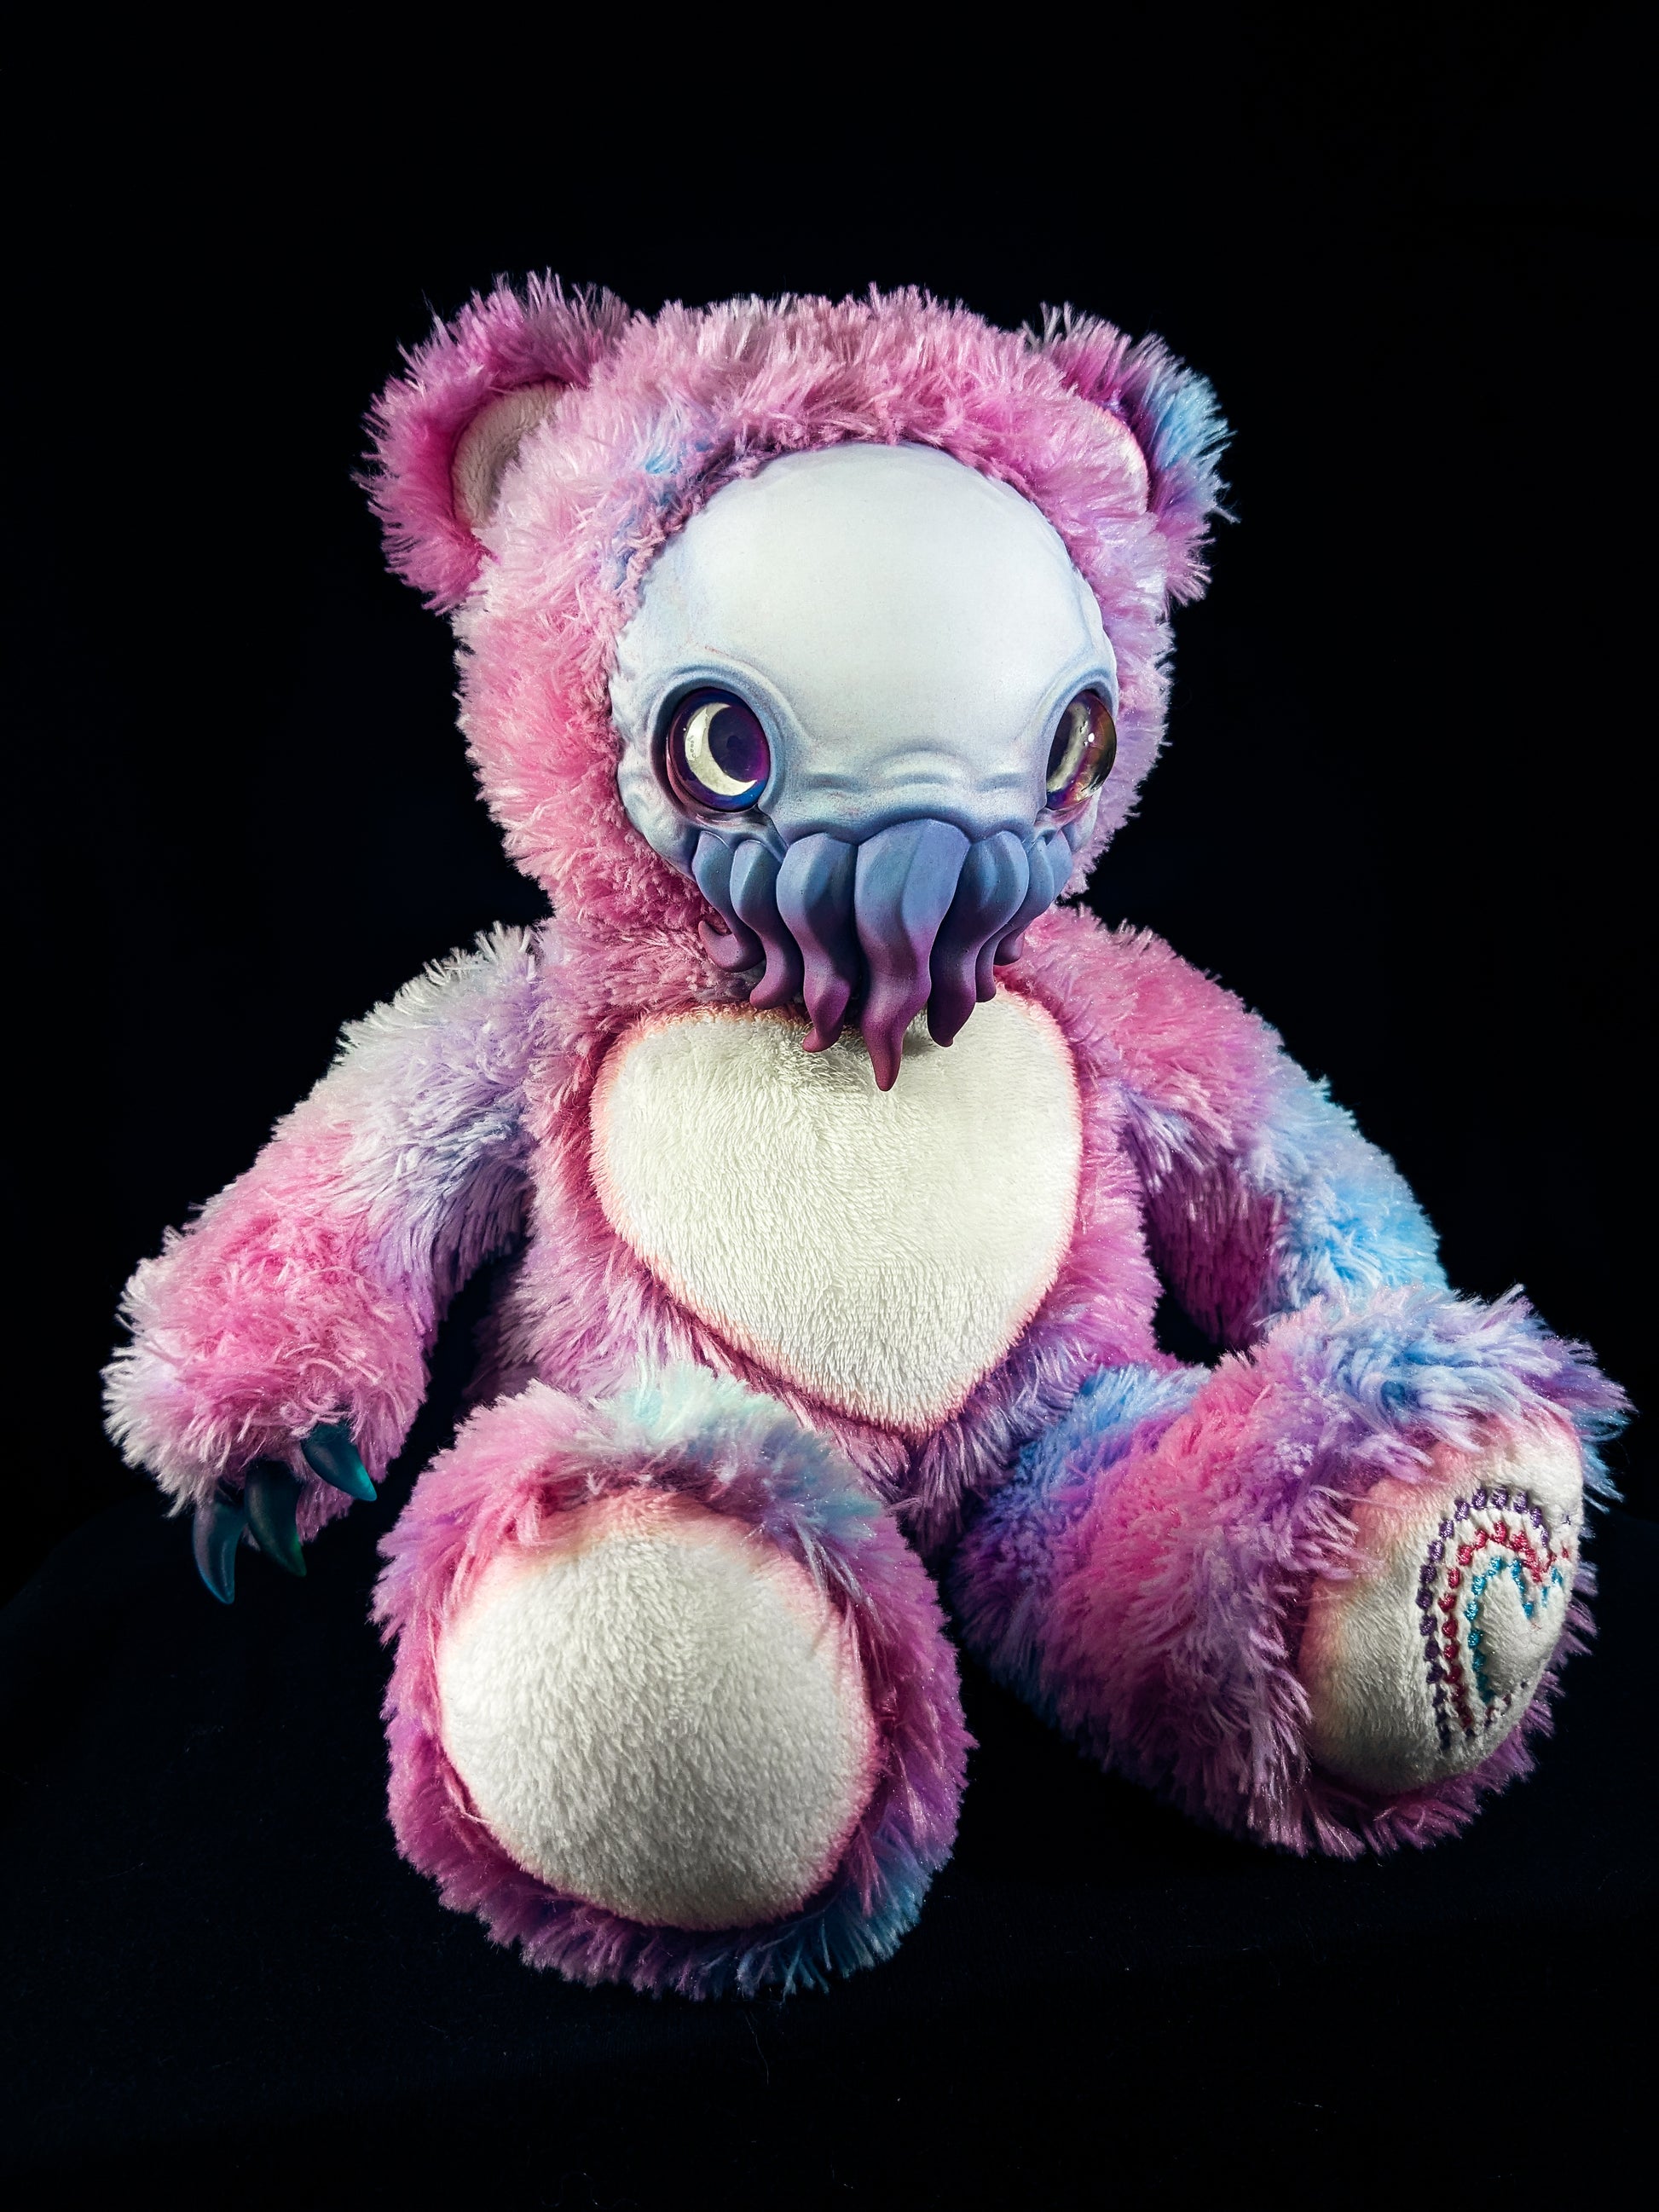 Cthulhu Floss: ELDINUTH - CRYPTCRITS Handcrafted Lovecraftian Cthulhu Art Doll Plush Toy for Eldritch Entities